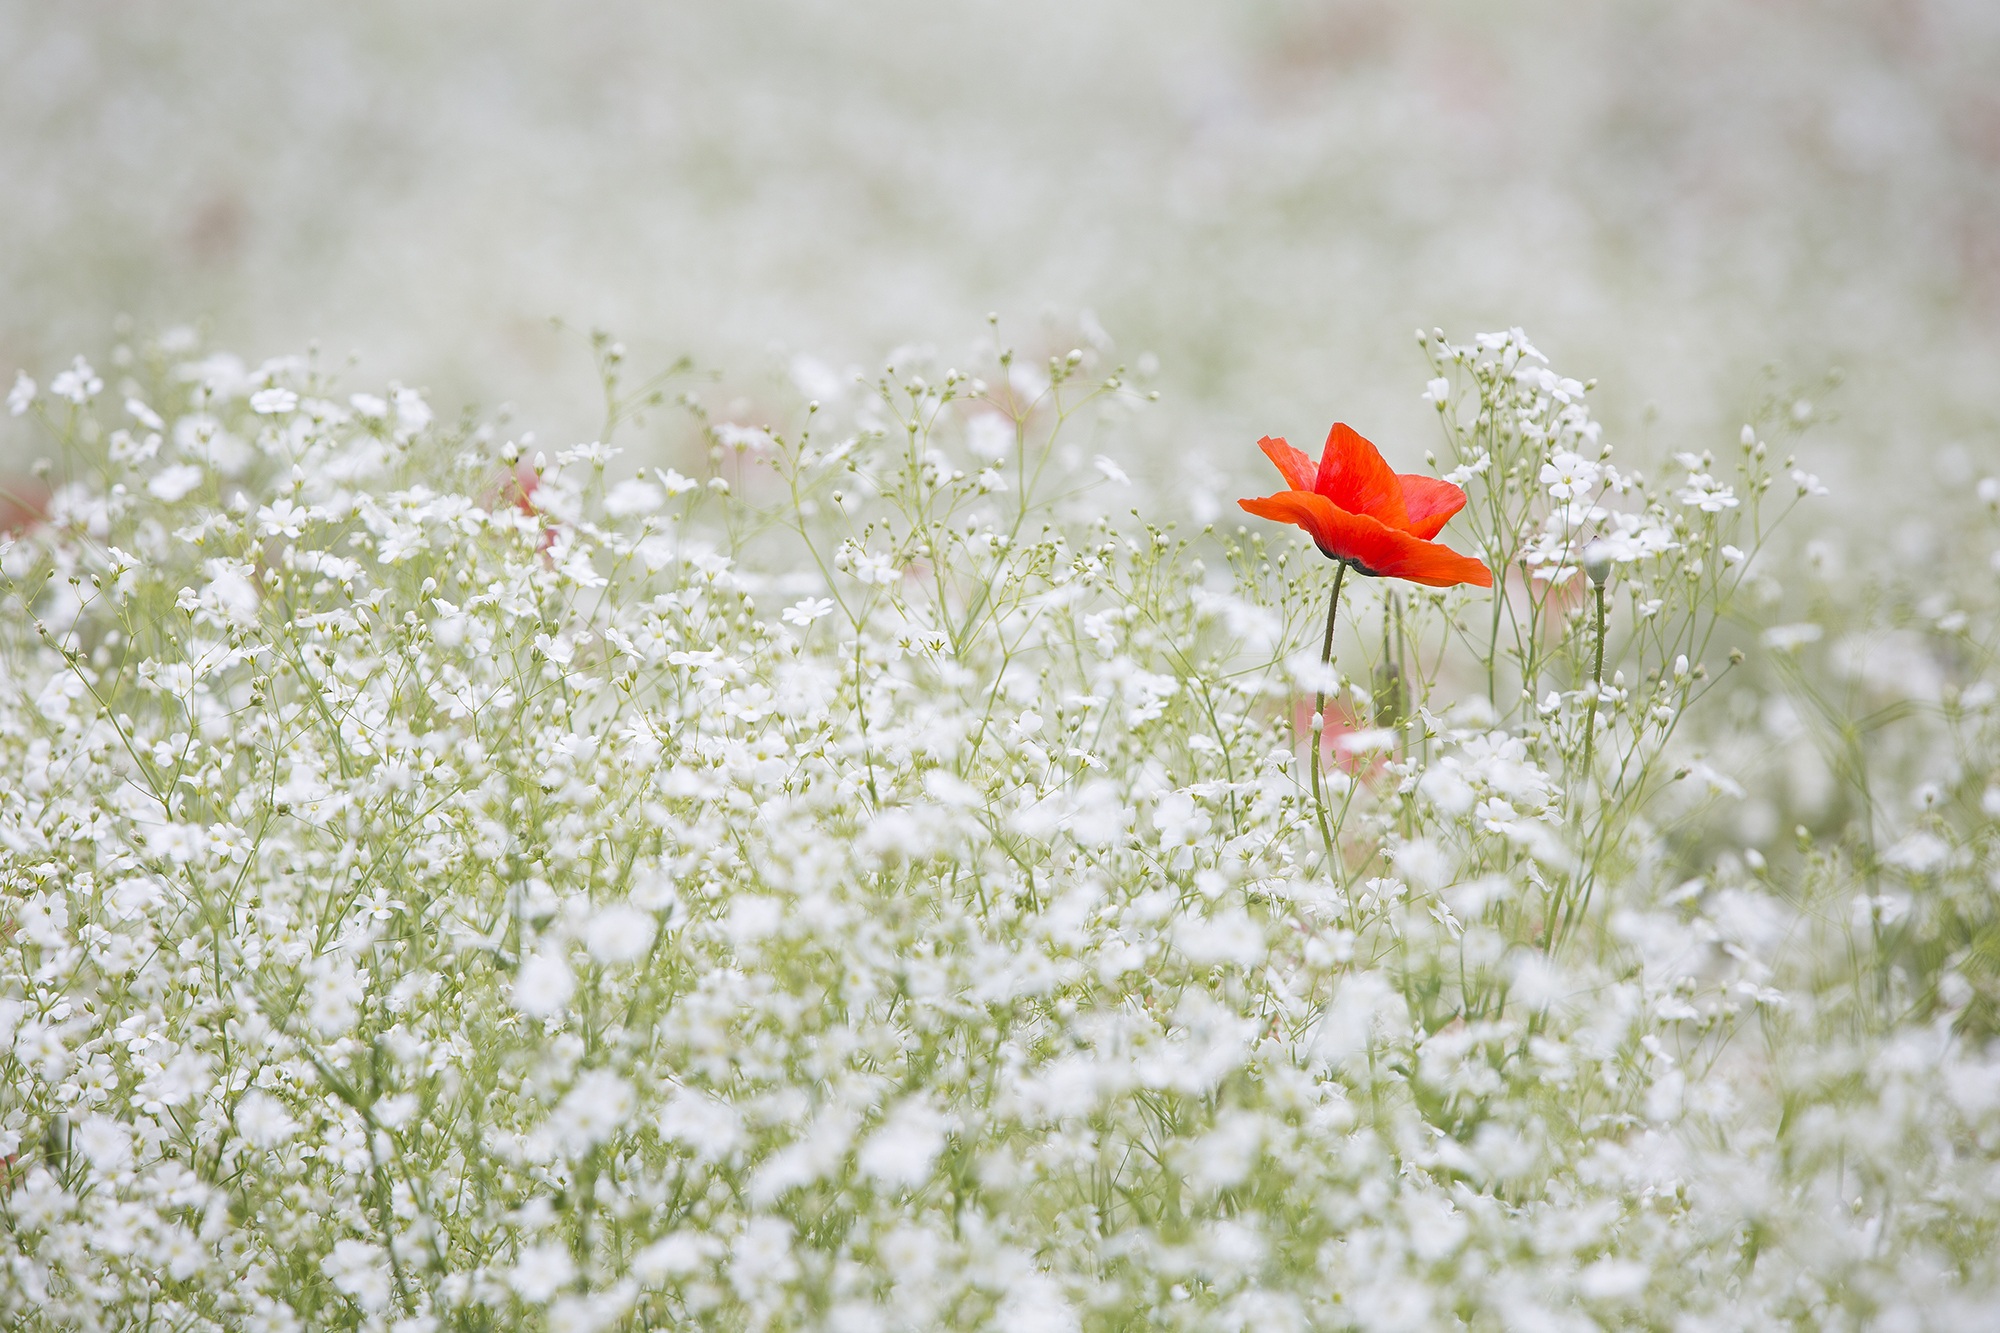 A red flower blooming among white wildflowers